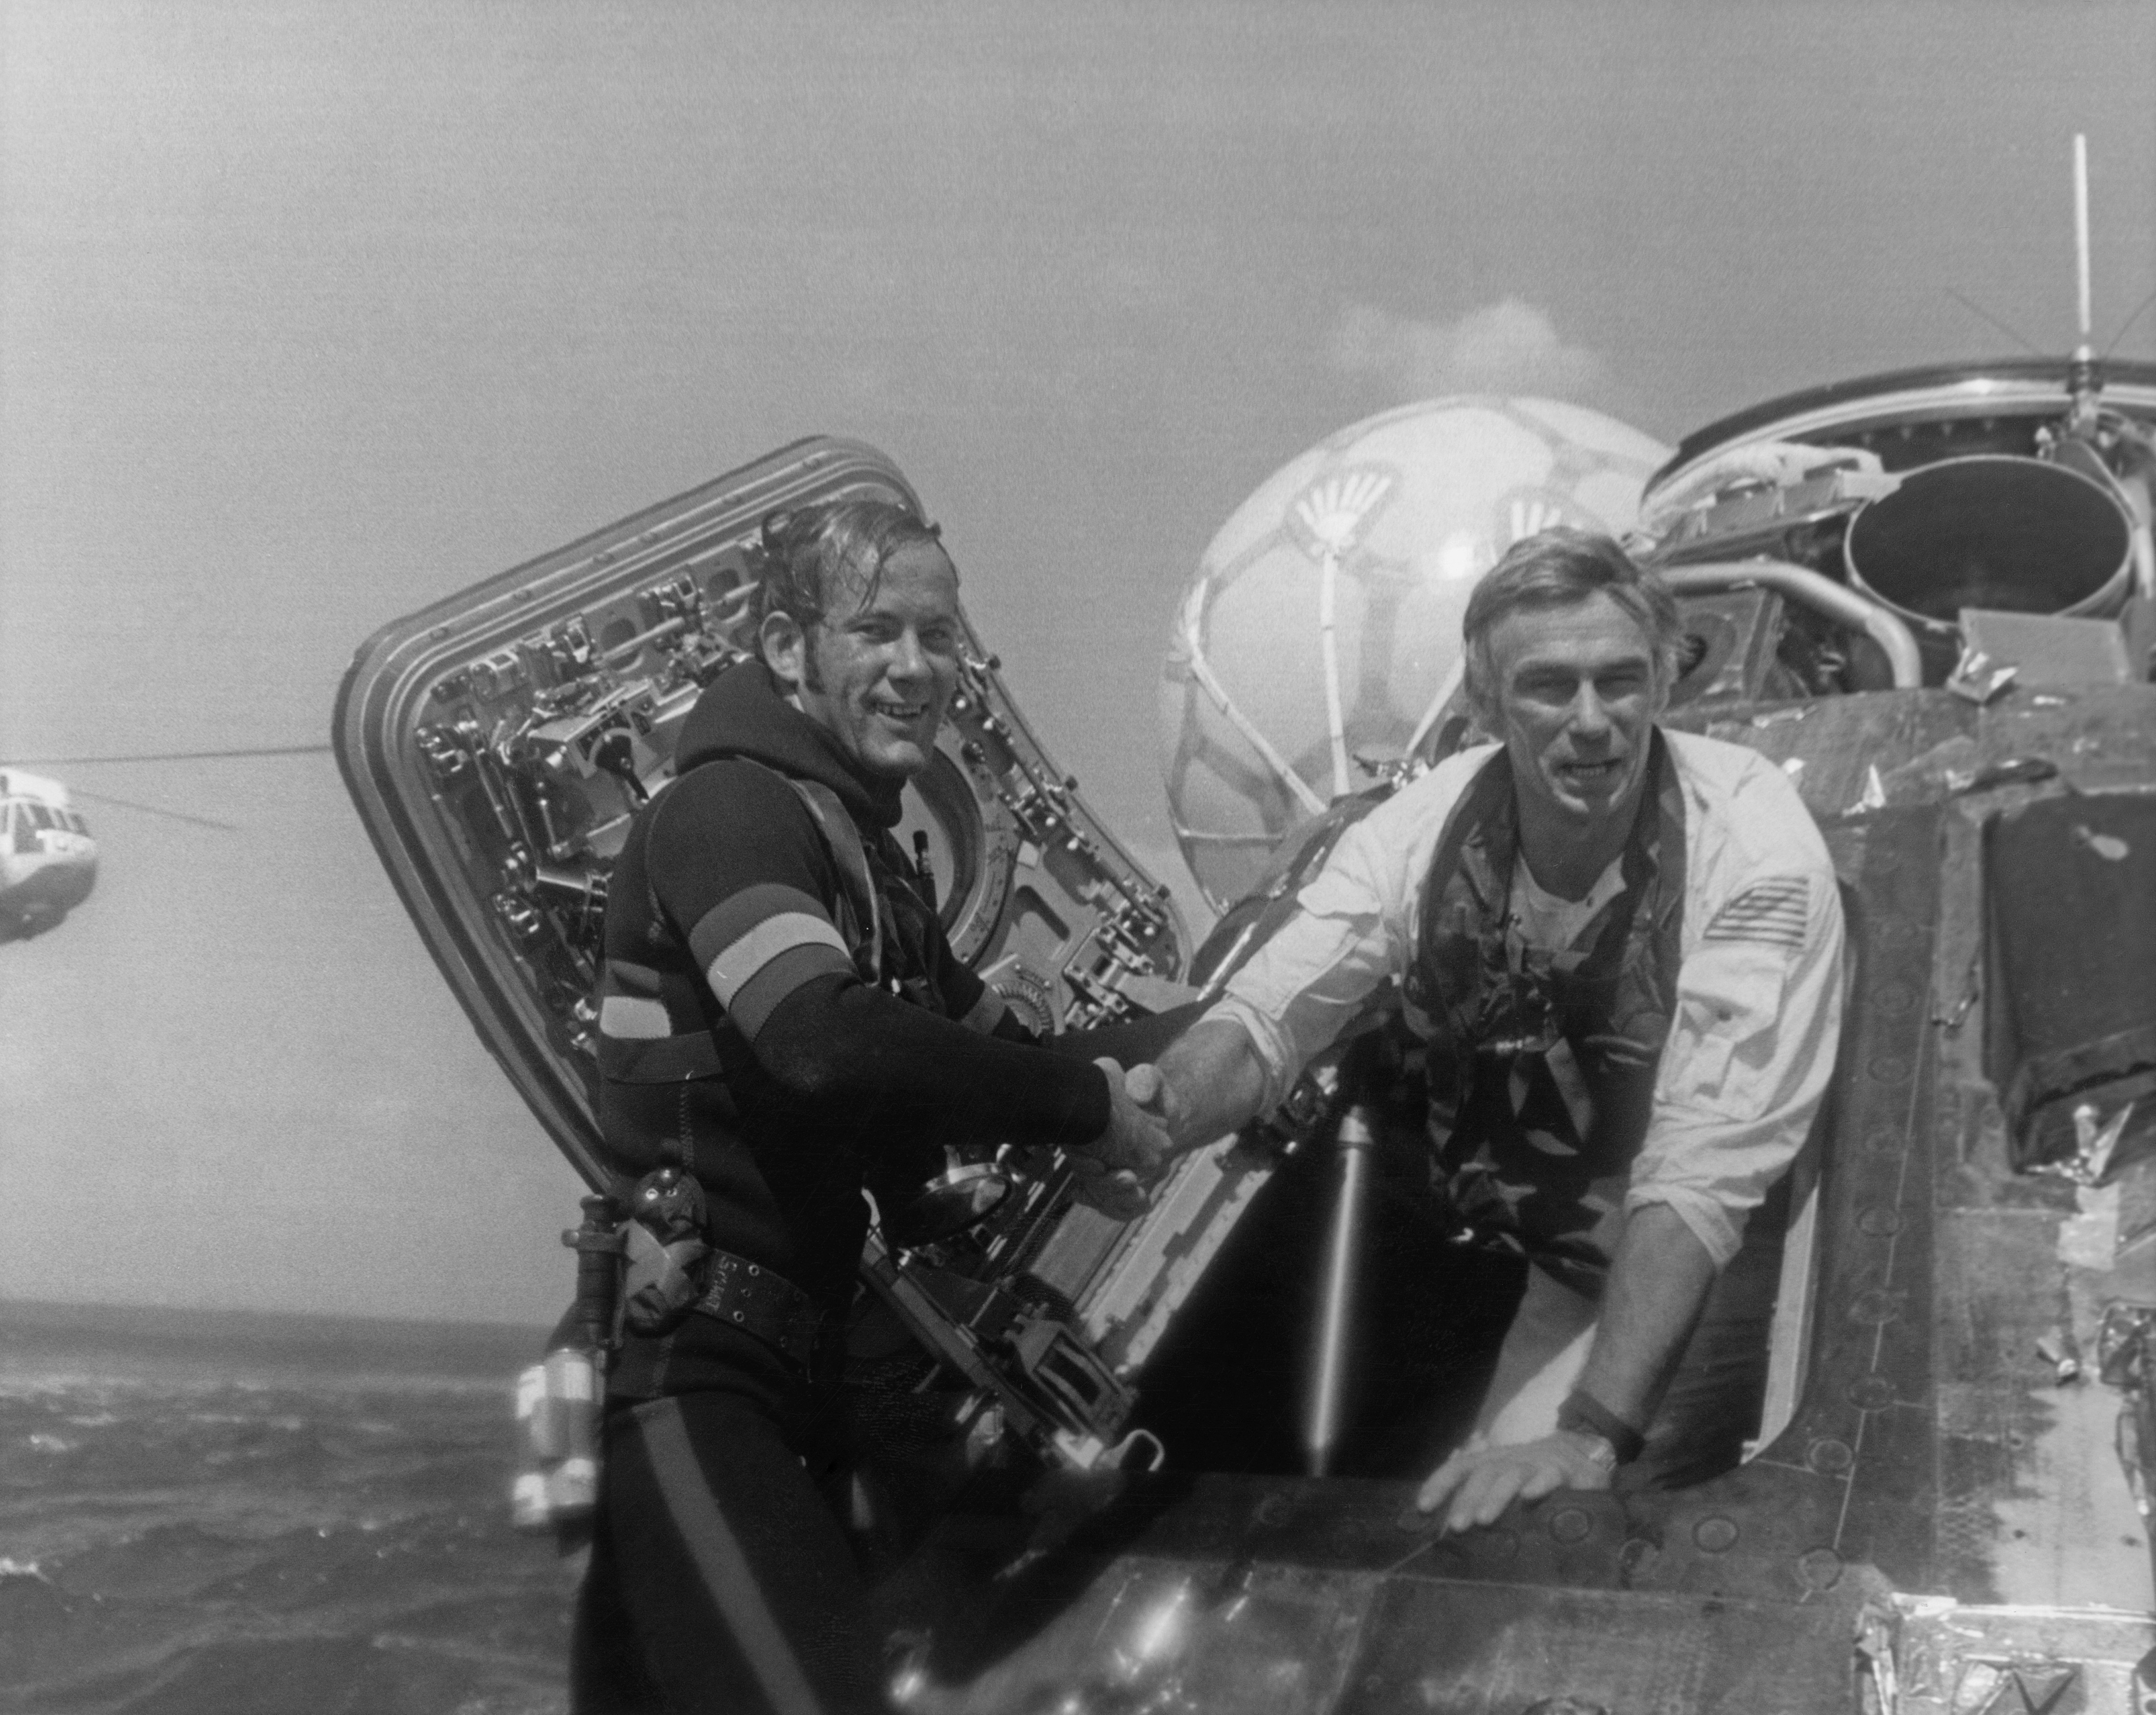 NASA astronaut Eugene Cernan, Commander of the Apollo 17 lunar mission, is welcomed back to Earth by a US Navy Pararescueman, after splashdown in the Pacific Ocean, 19th December 1972. (NASA&mdash;Getty Images)